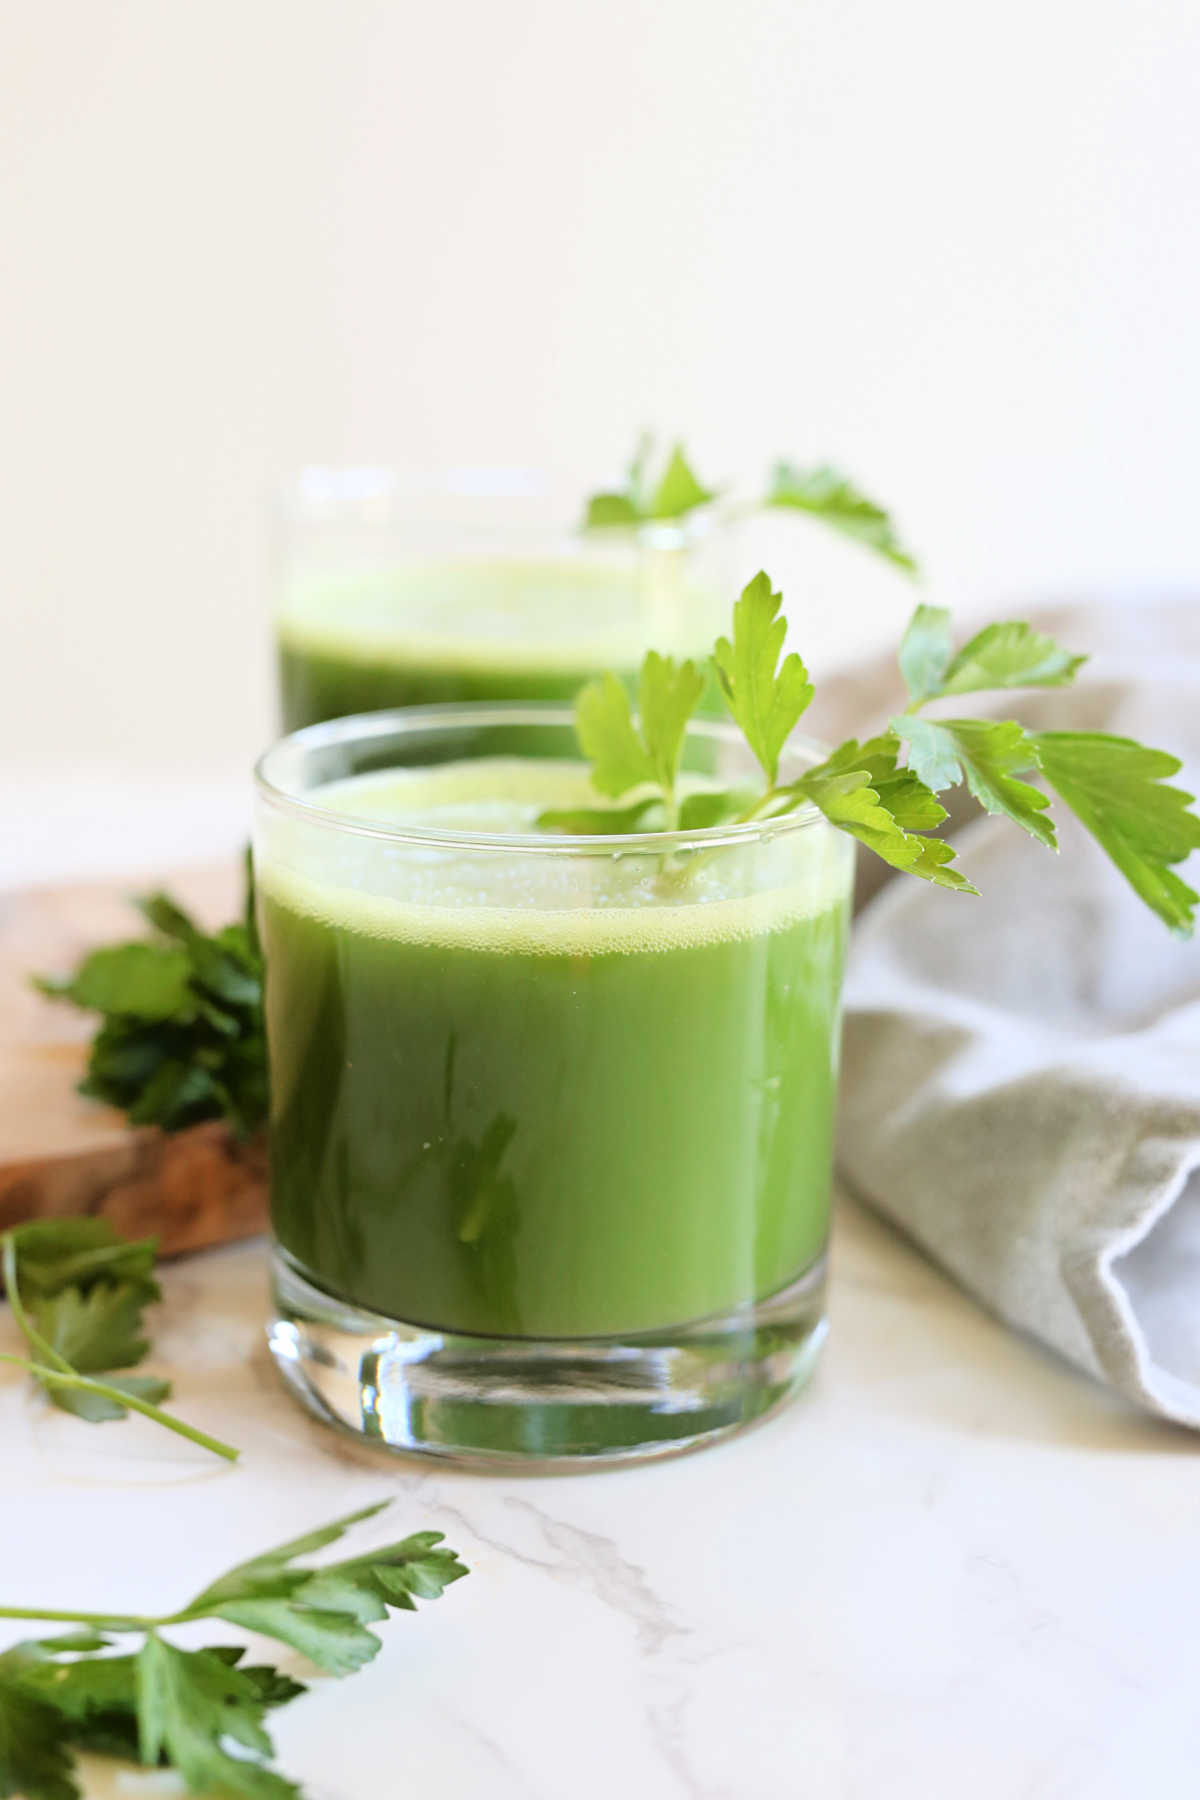 Fresh parsley juice in a glass with parsley leaves on a stem garnished in the juice.